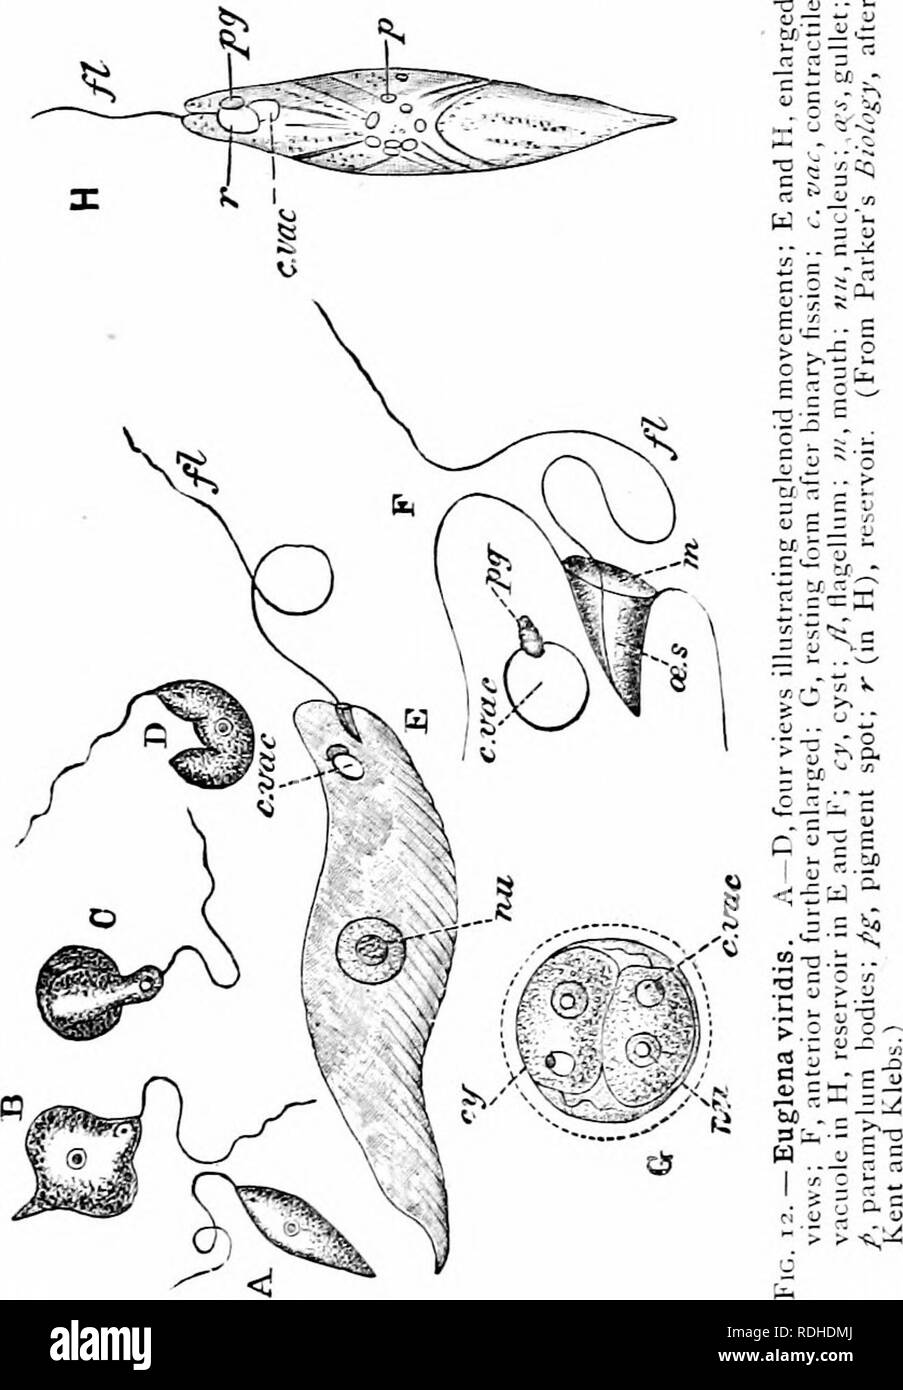 . A manual of zoology. PHYLUM PROTOZOA 35 The body of Euglena (£, H) is spindle-shaped, and has at the blunt anterior end a depression, the gullet (F. ces), from the inner surface of which springs a single long flagellum {fl). The organism is propelled through the water by the. lashing movements of the flagellum, which is always directed forwards ; it can also perform slow, worm-like movements of contraction and expansion {A—D), but anything like the. Please note that these images are extracted from scanned page images that may have been digitally enhanced for readability - coloration and appe Stock Photo